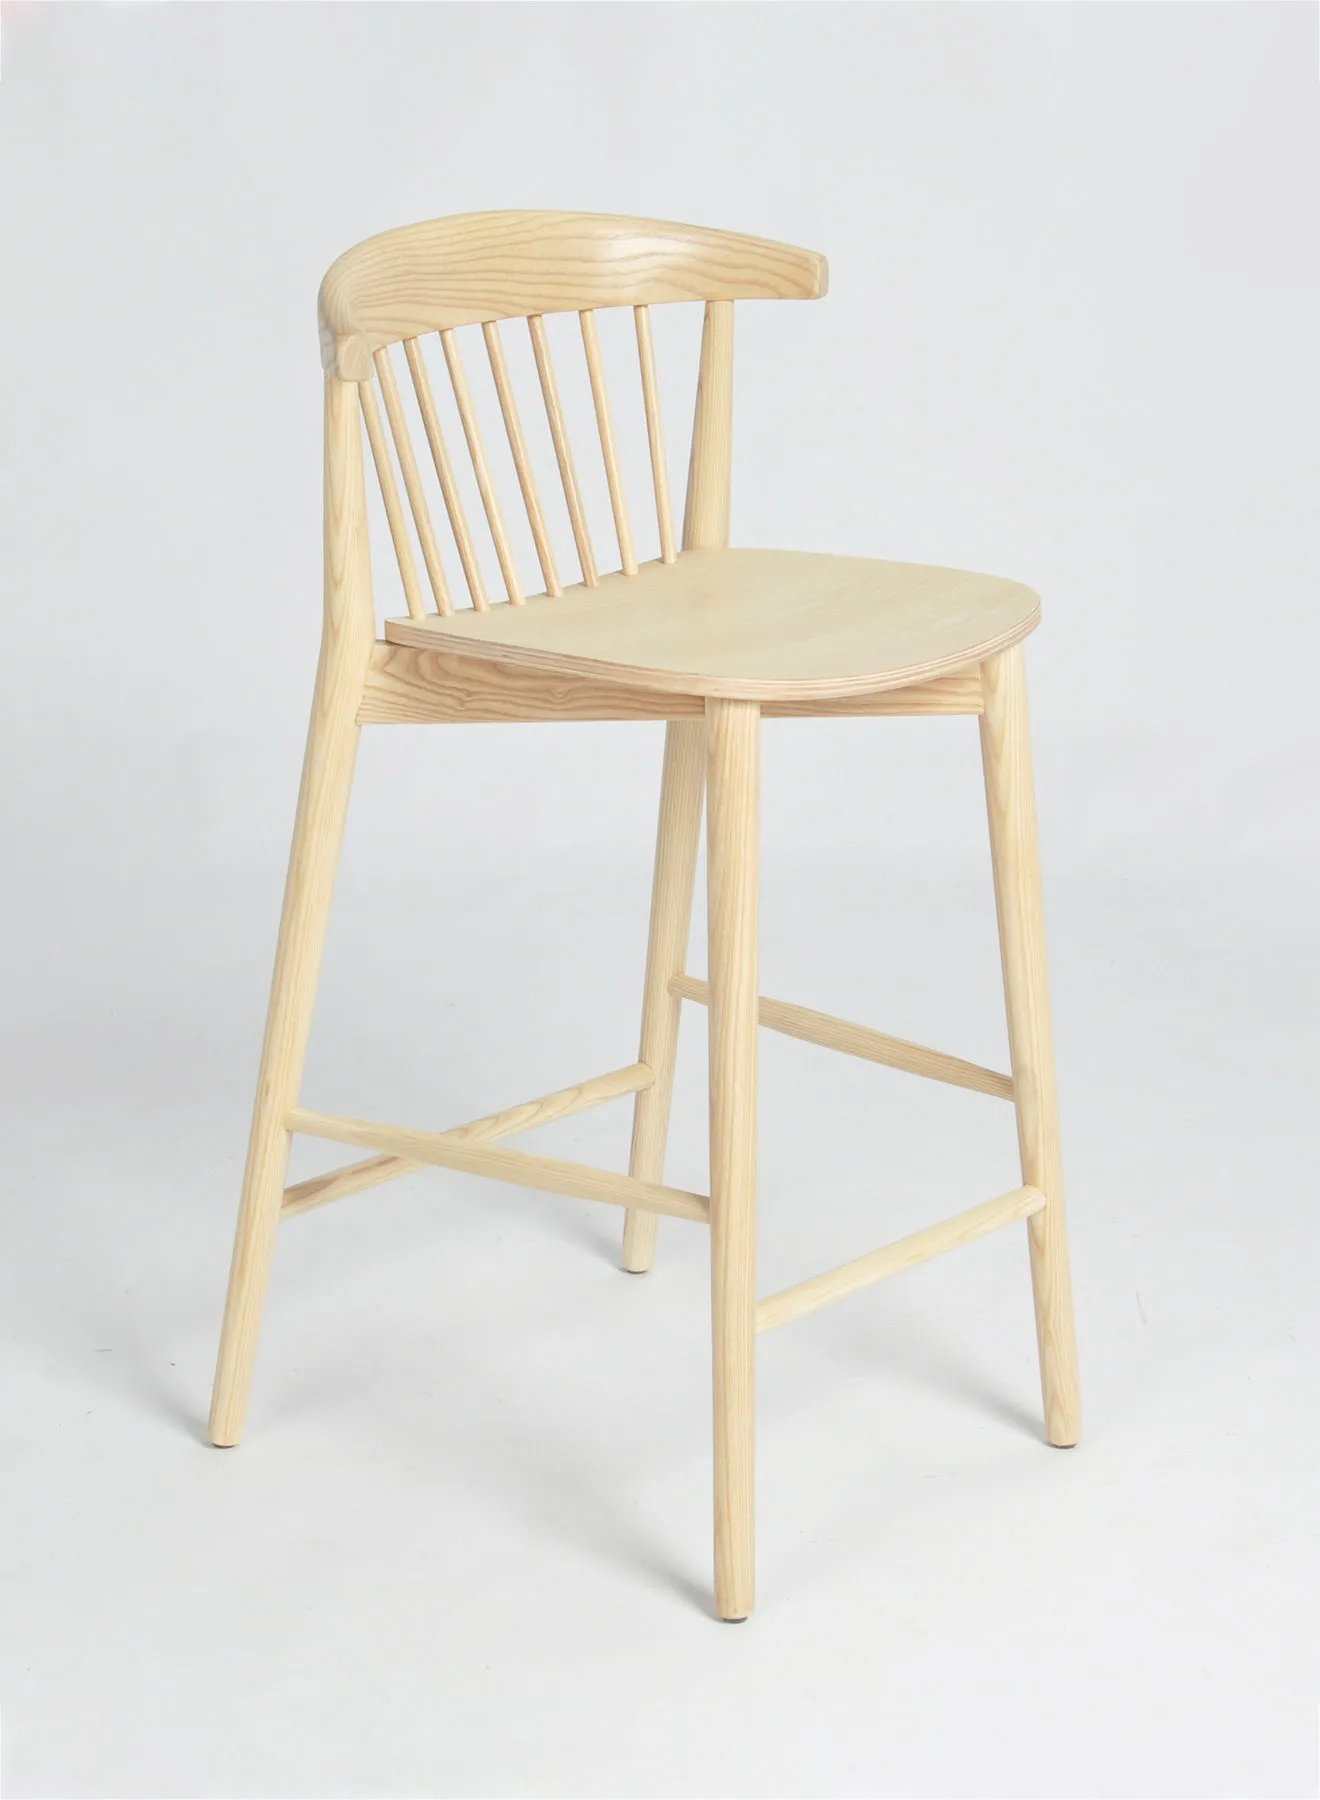 Switch Stool In Natural Size 46 X 48 X 99